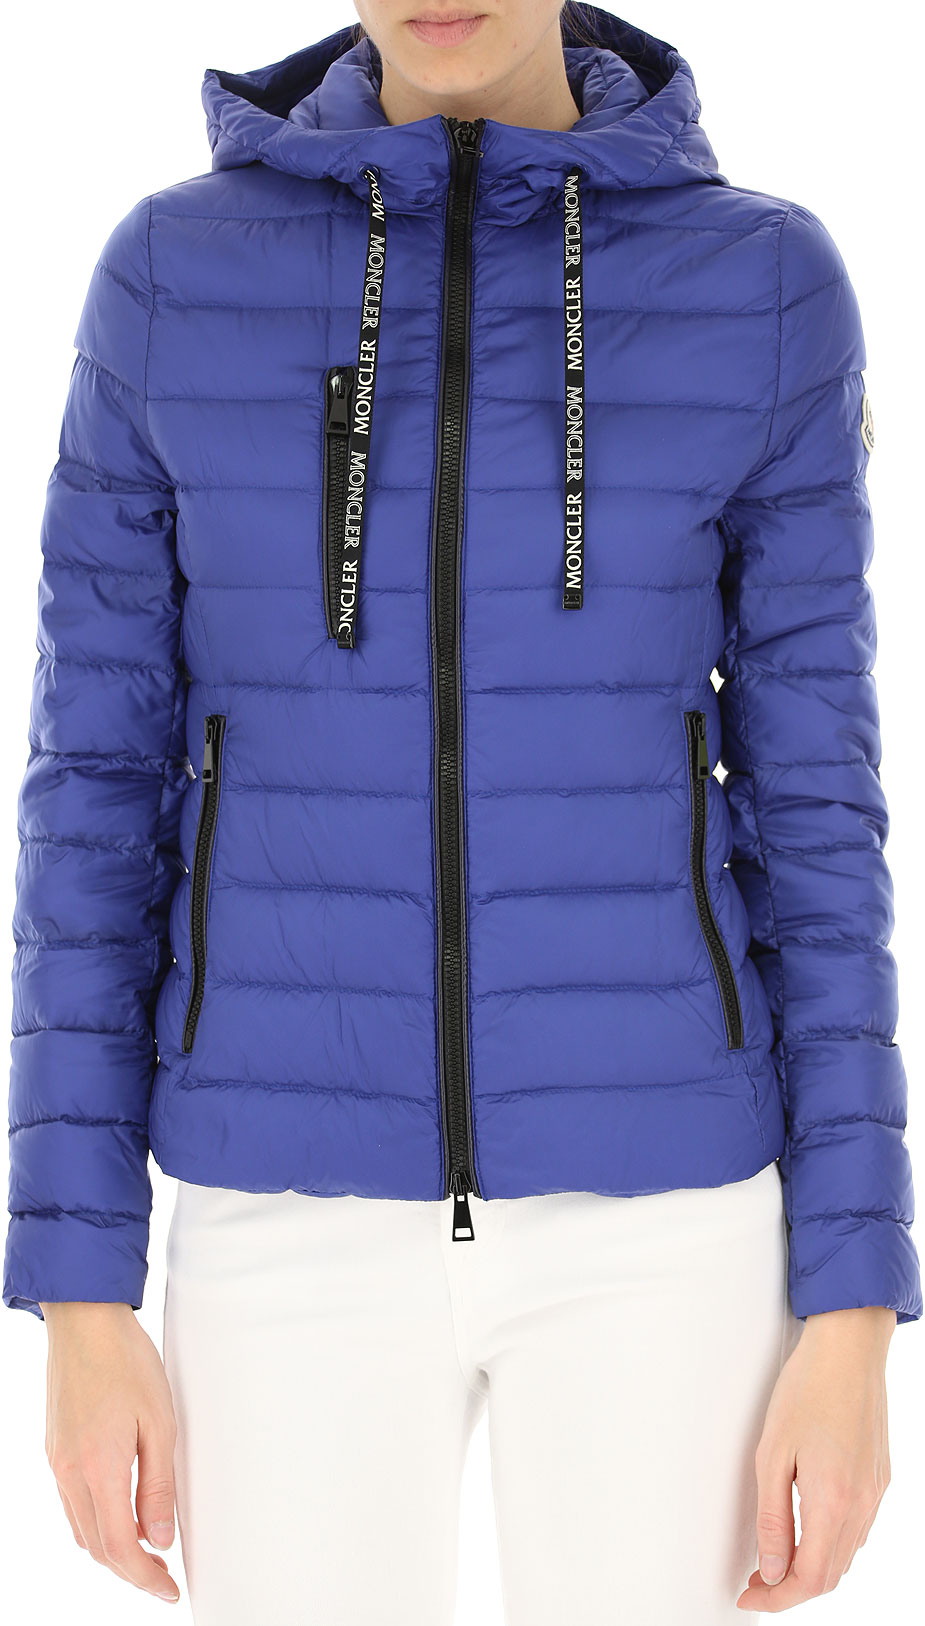 Womens Clothing Moncler, Style code: 4538199c0000-752-